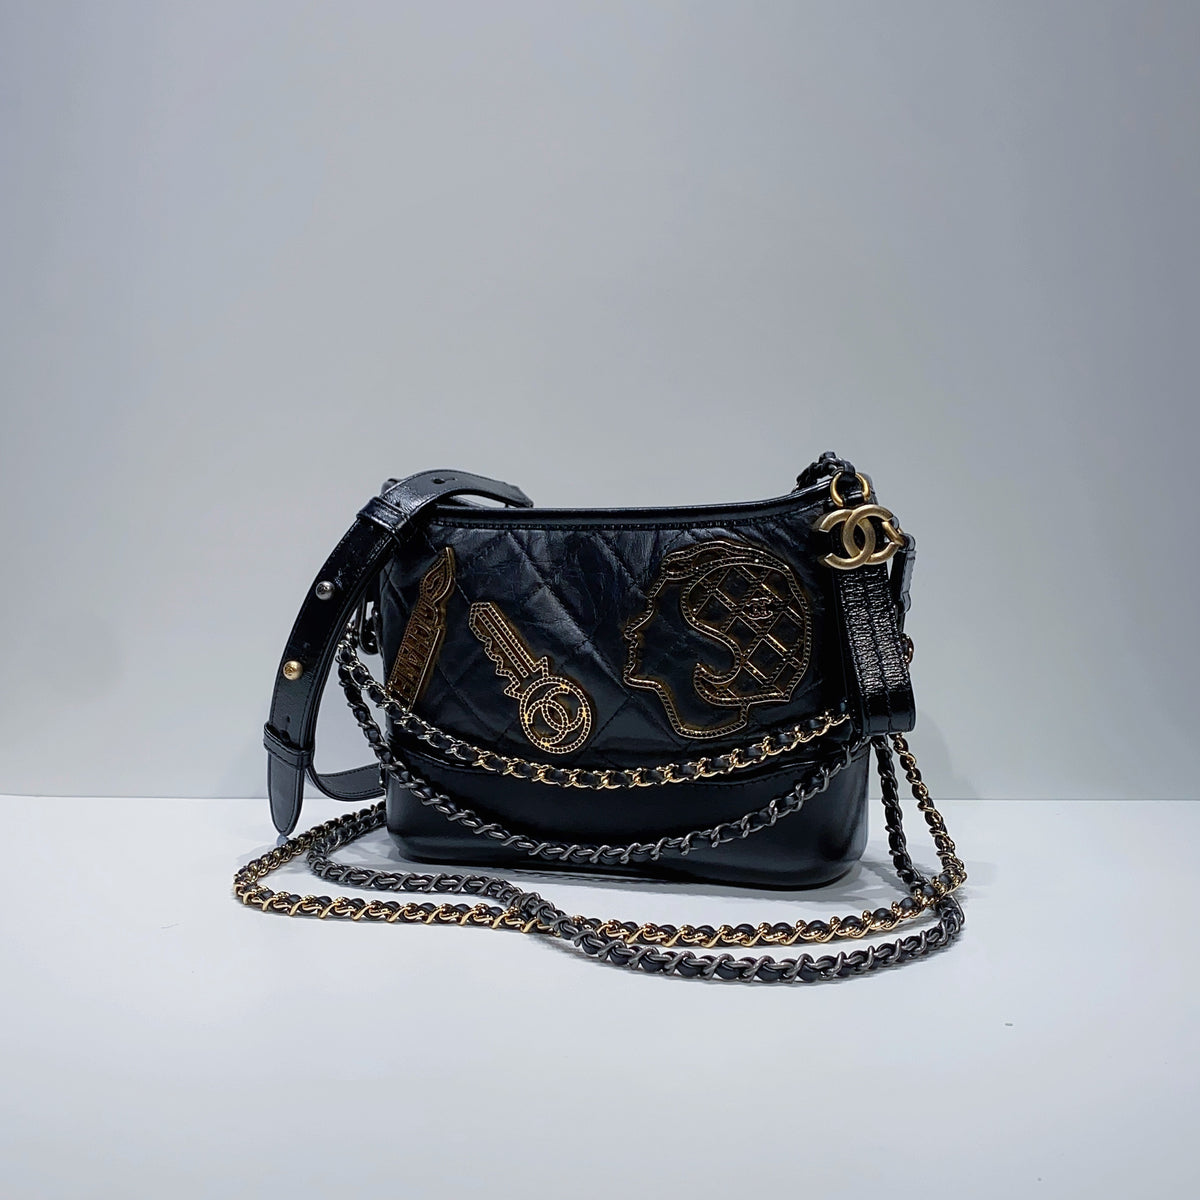 Chanel Small Charms Gabrielle Hobo